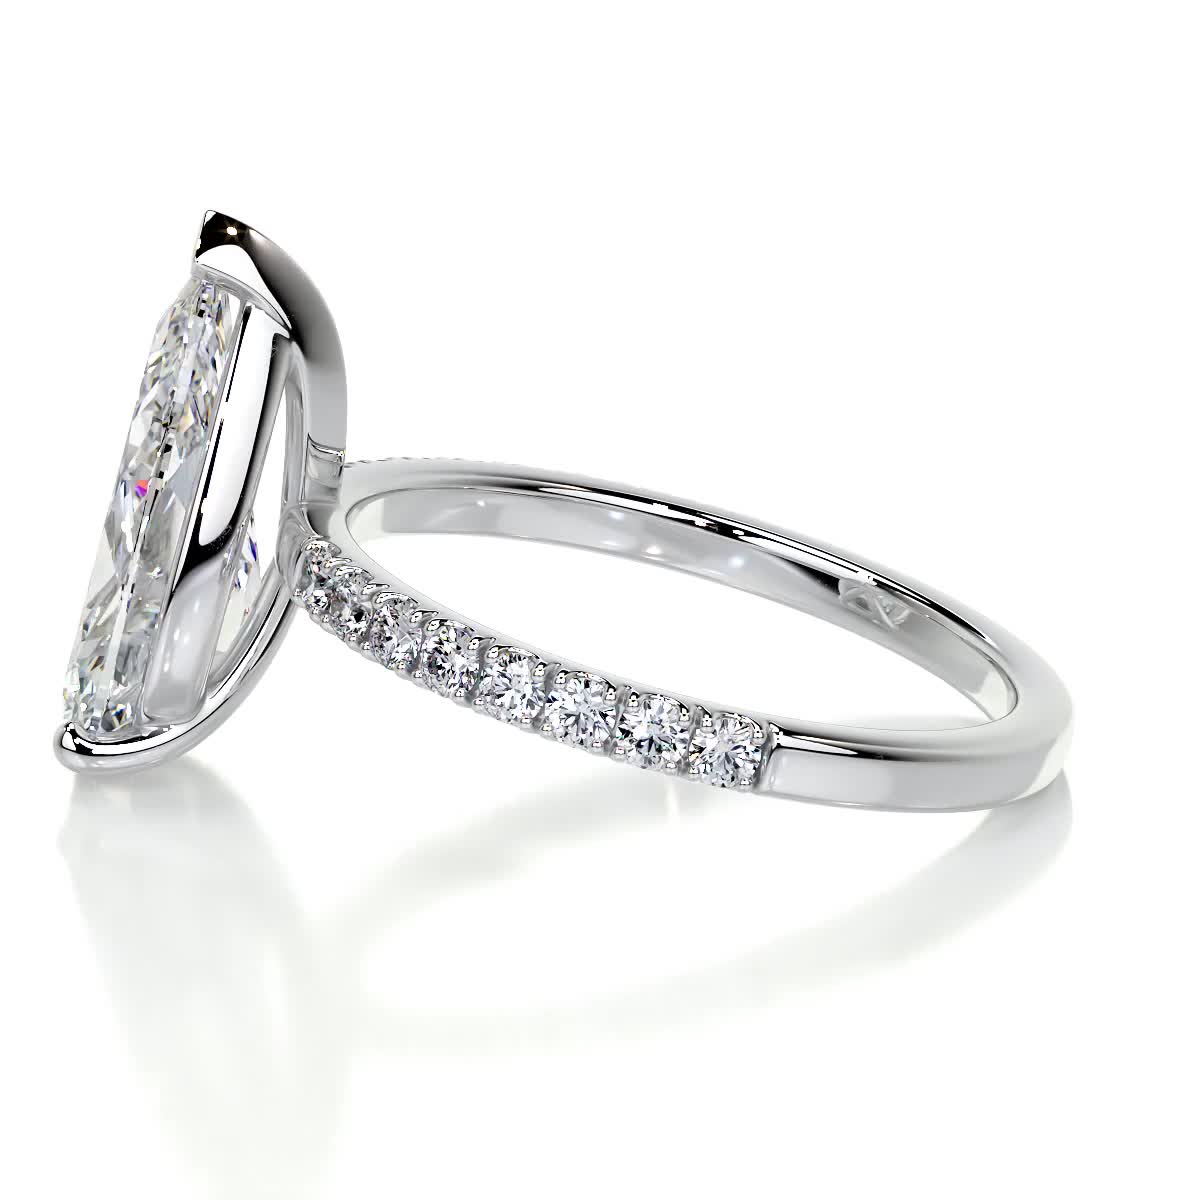 5.0 CT Pear Solitaire CVD F/VS2 Diamond Engagement Ring 6